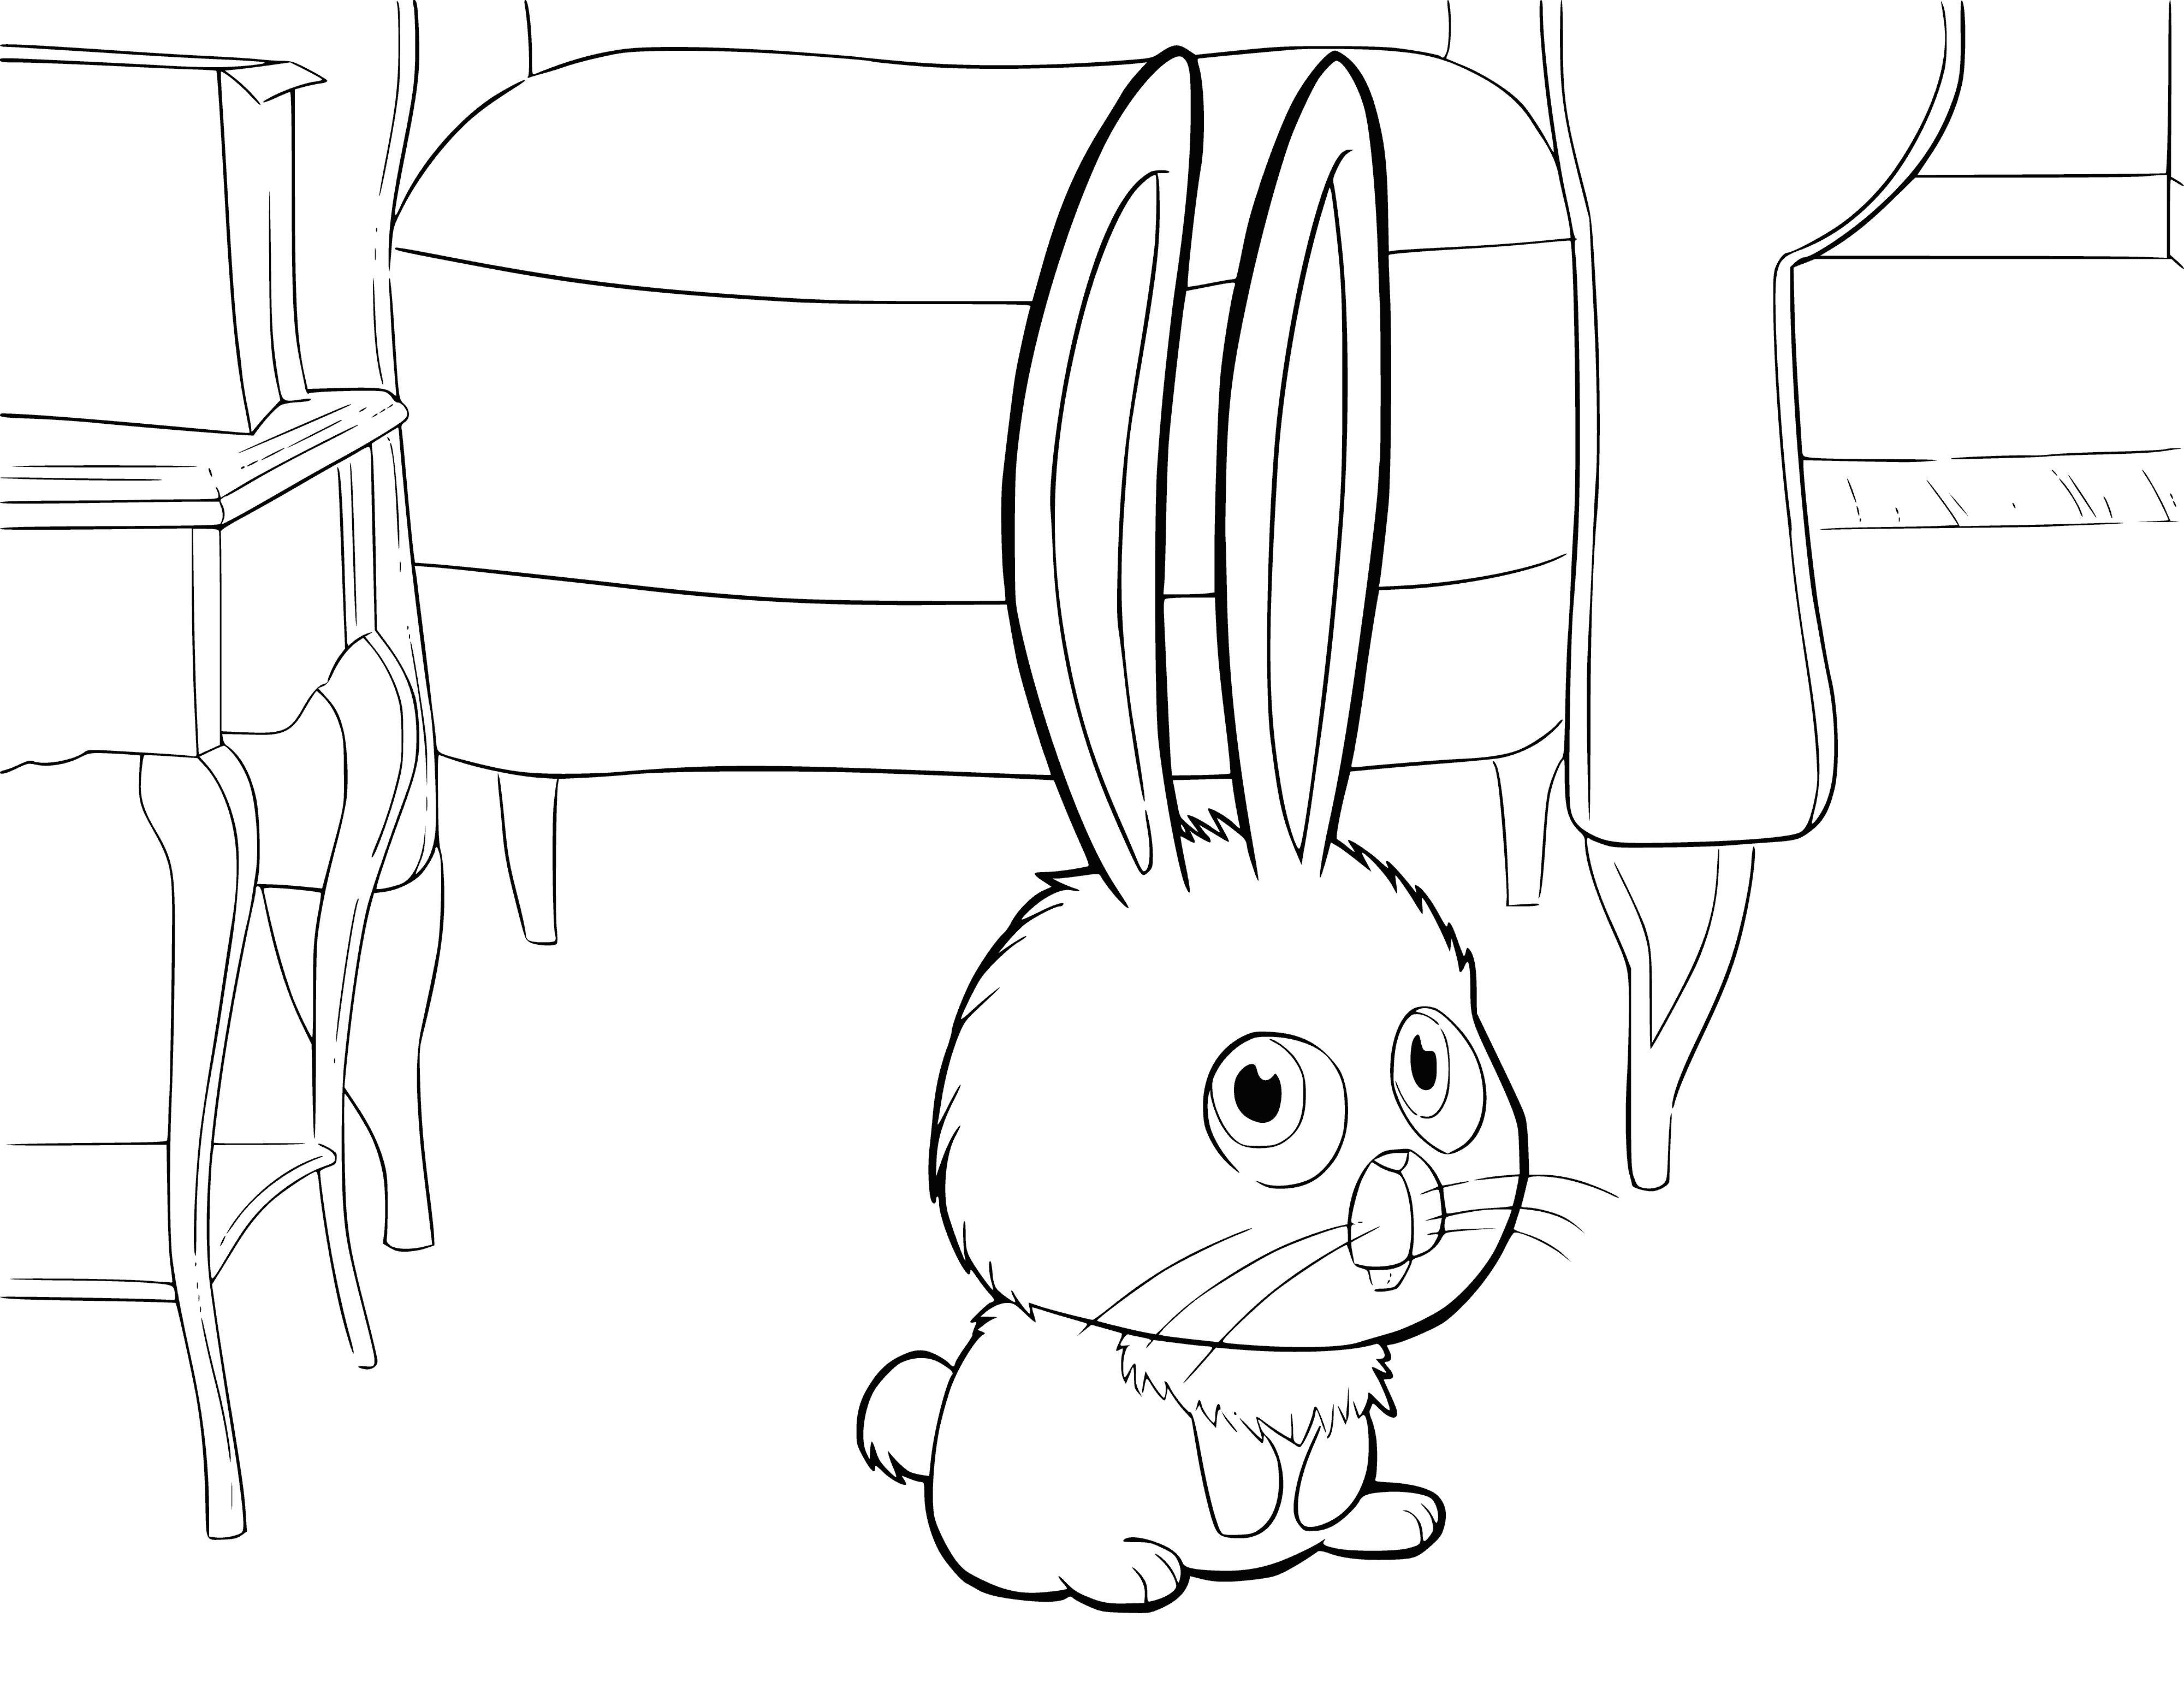 coloring page: White rabbit stands in snow patch with tree behind. Blue eyes & leaves make for a cozy coloring page.